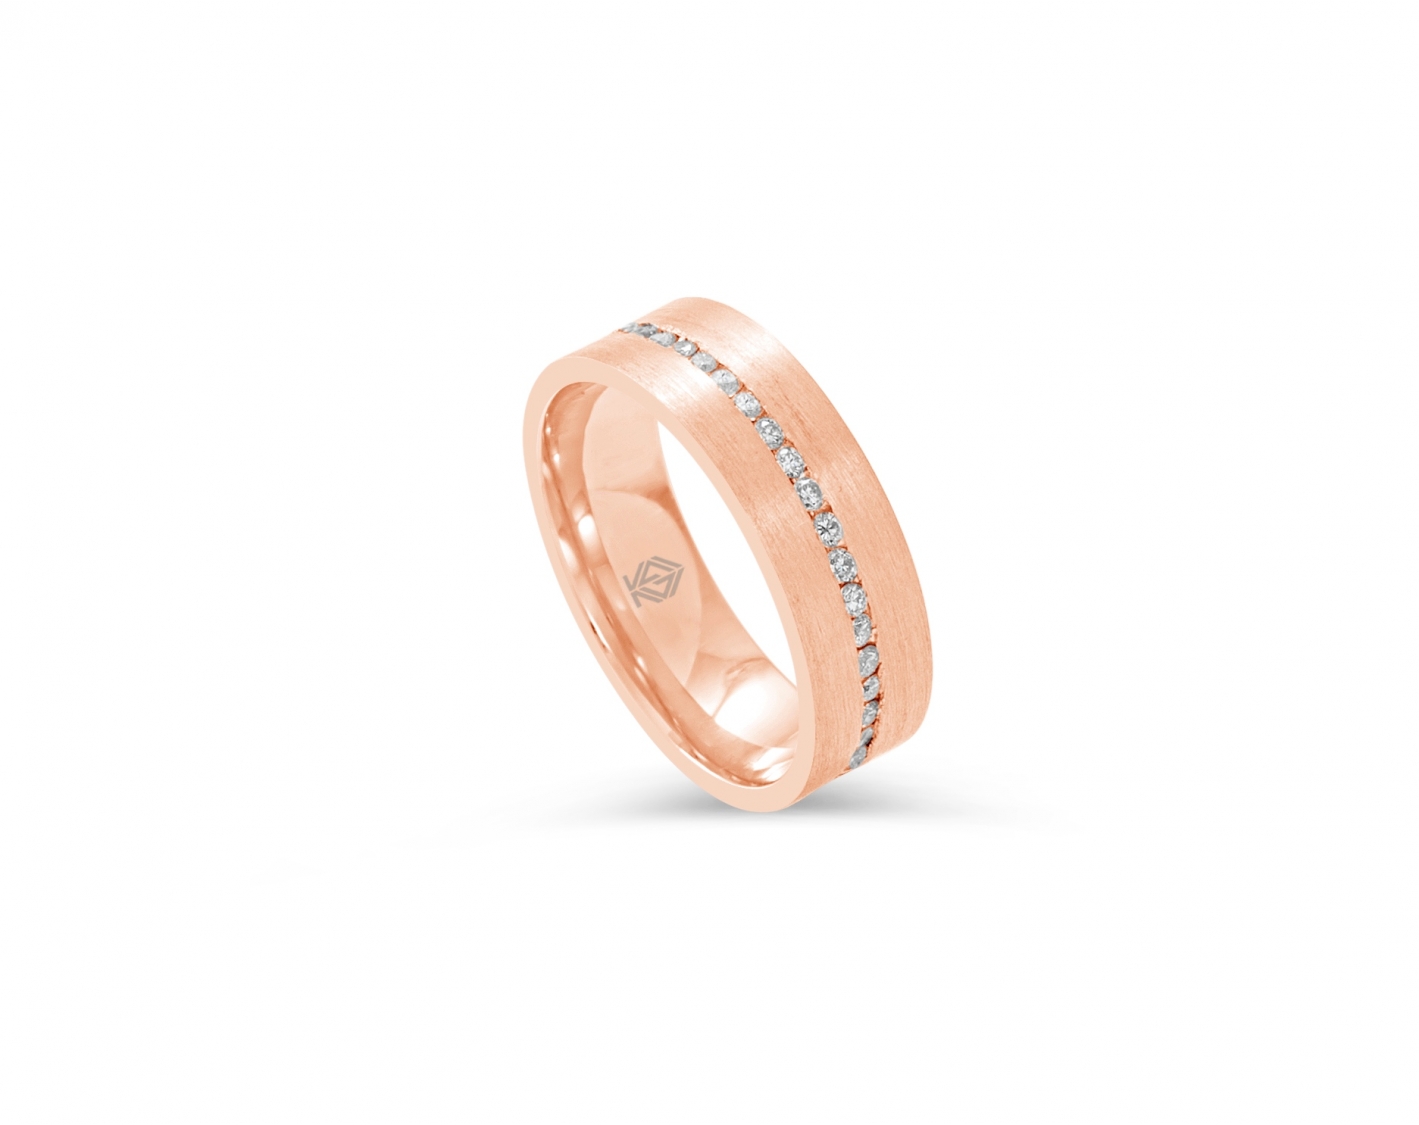 18k rose gold 6mm matte wedding band with diamonds and a shiny inlay